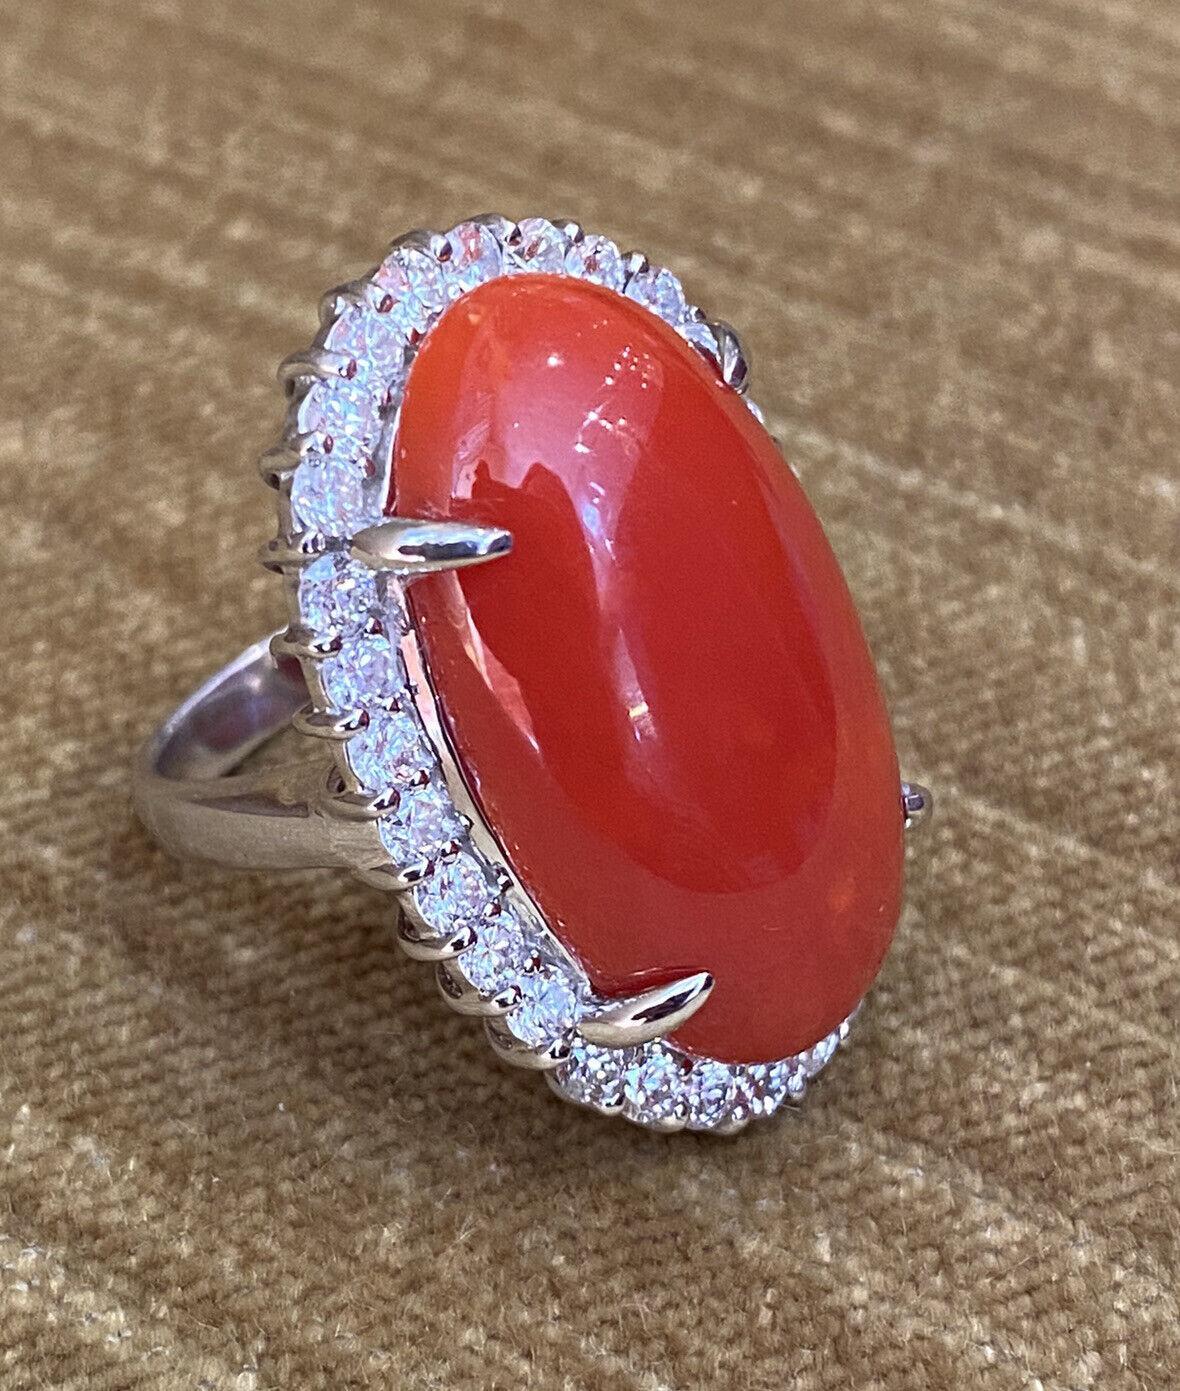 Estate 22.95 carats Red Coral & Diamond Cocktail Ring in Platinum

Estate Red Coral and Diamond Cocktail Ring features a 22.95 carat Oval-shaped Red Coral in the center surrounded by a halo of 30 Round Brilliant cut Diamonds, all set in